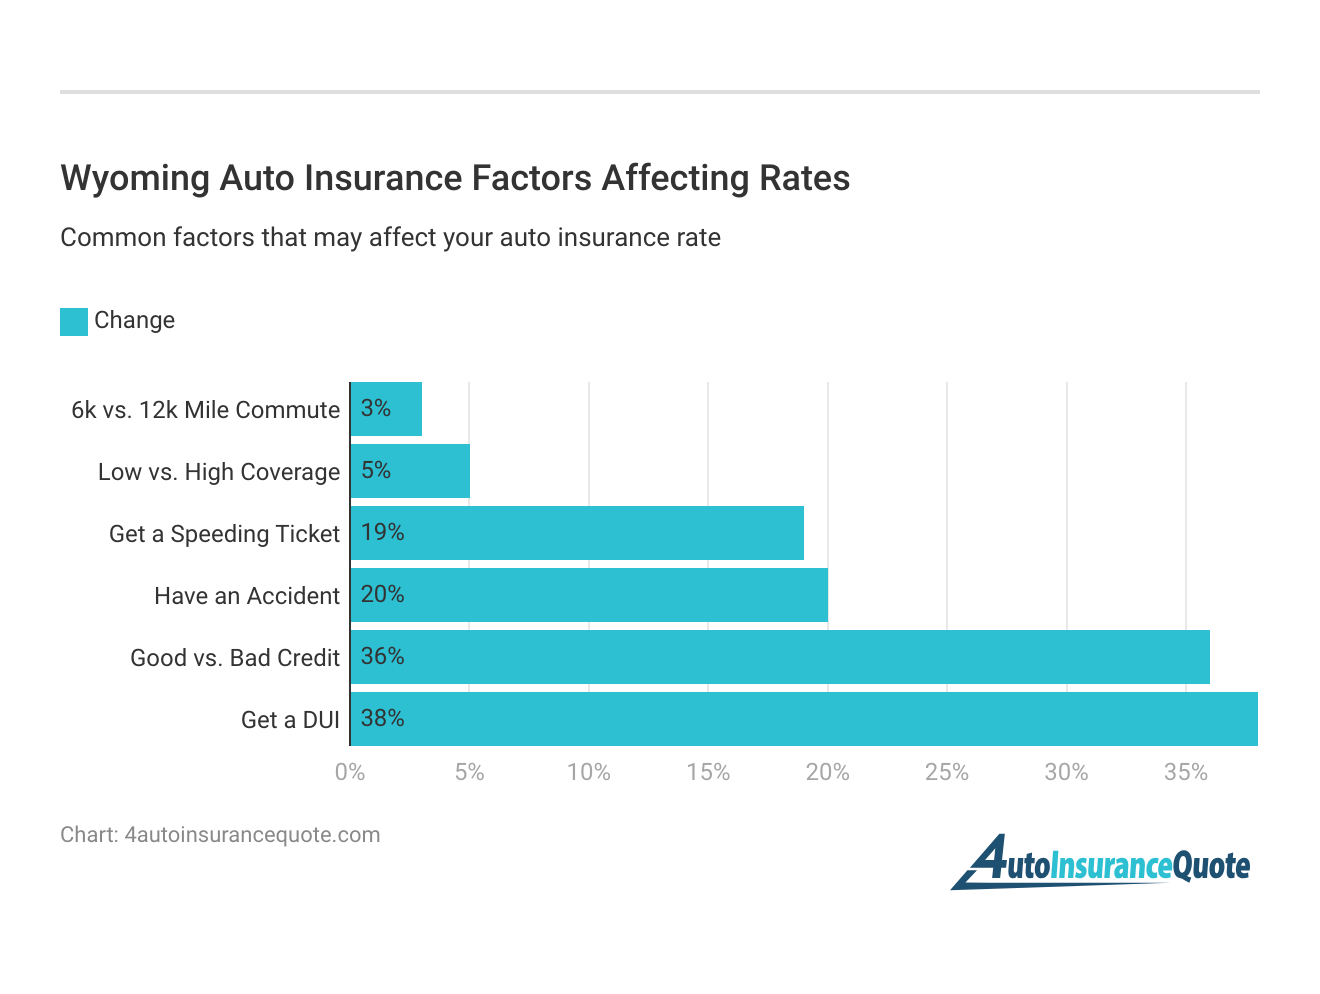 <h3>Wyoming Auto Insurance Factors Affecting Rates</h3>